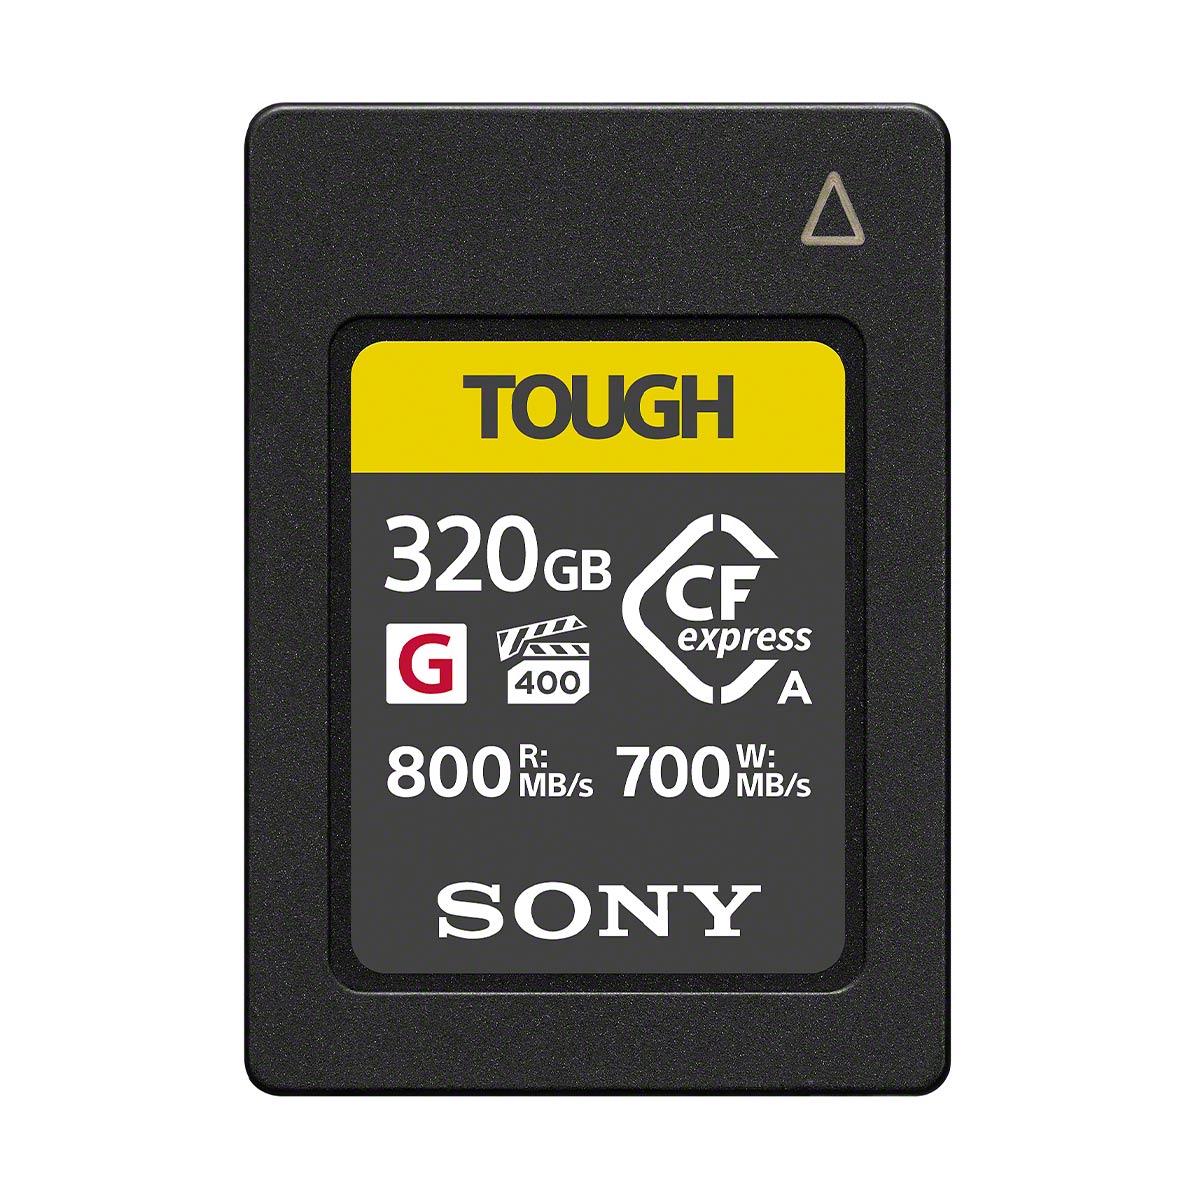 Sony 320GB CFexpress Type A Memory Card (VPG 400)